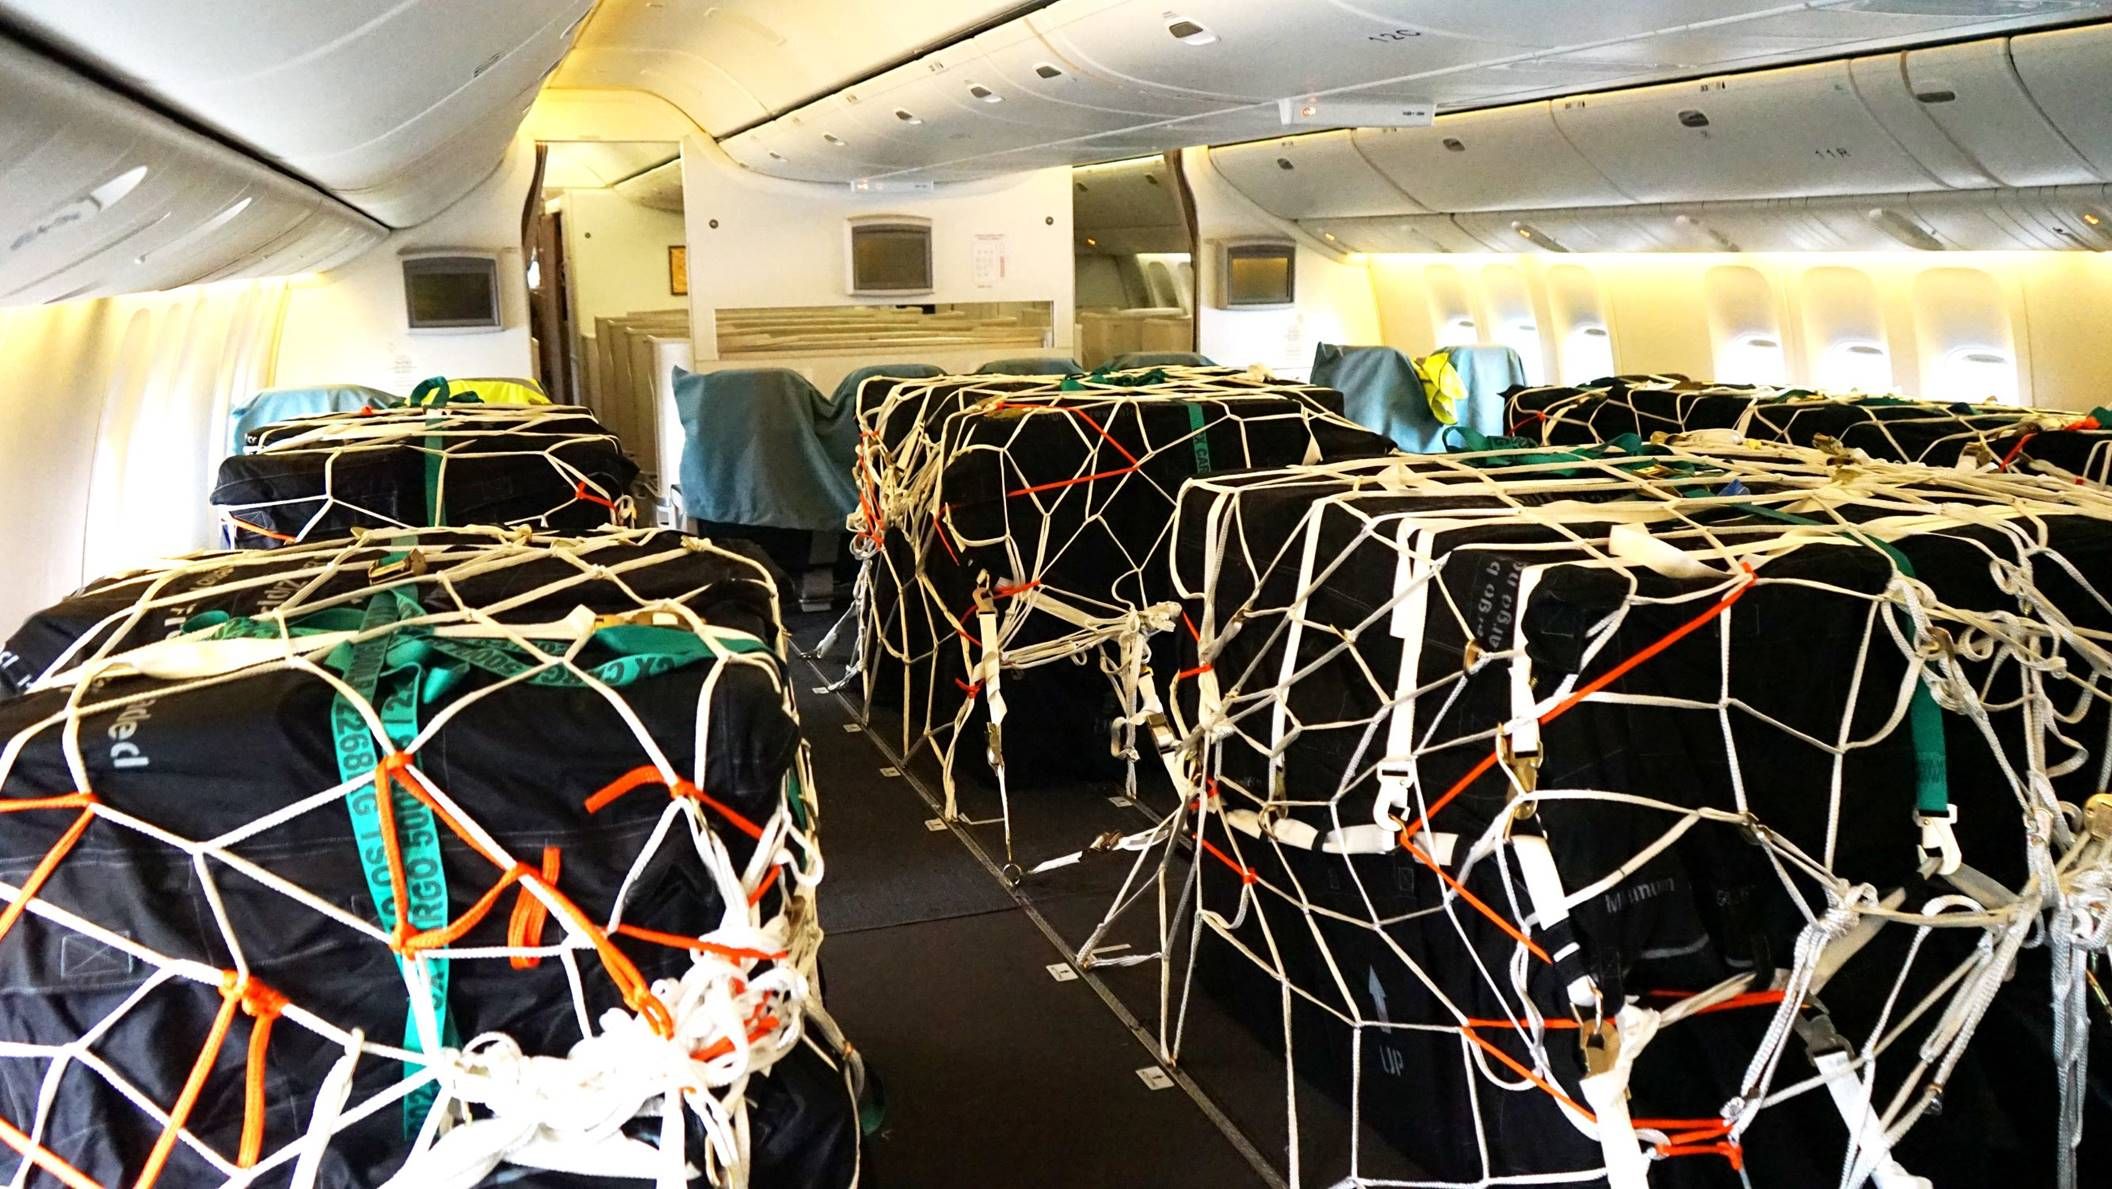 Airline with baggages secured to seats